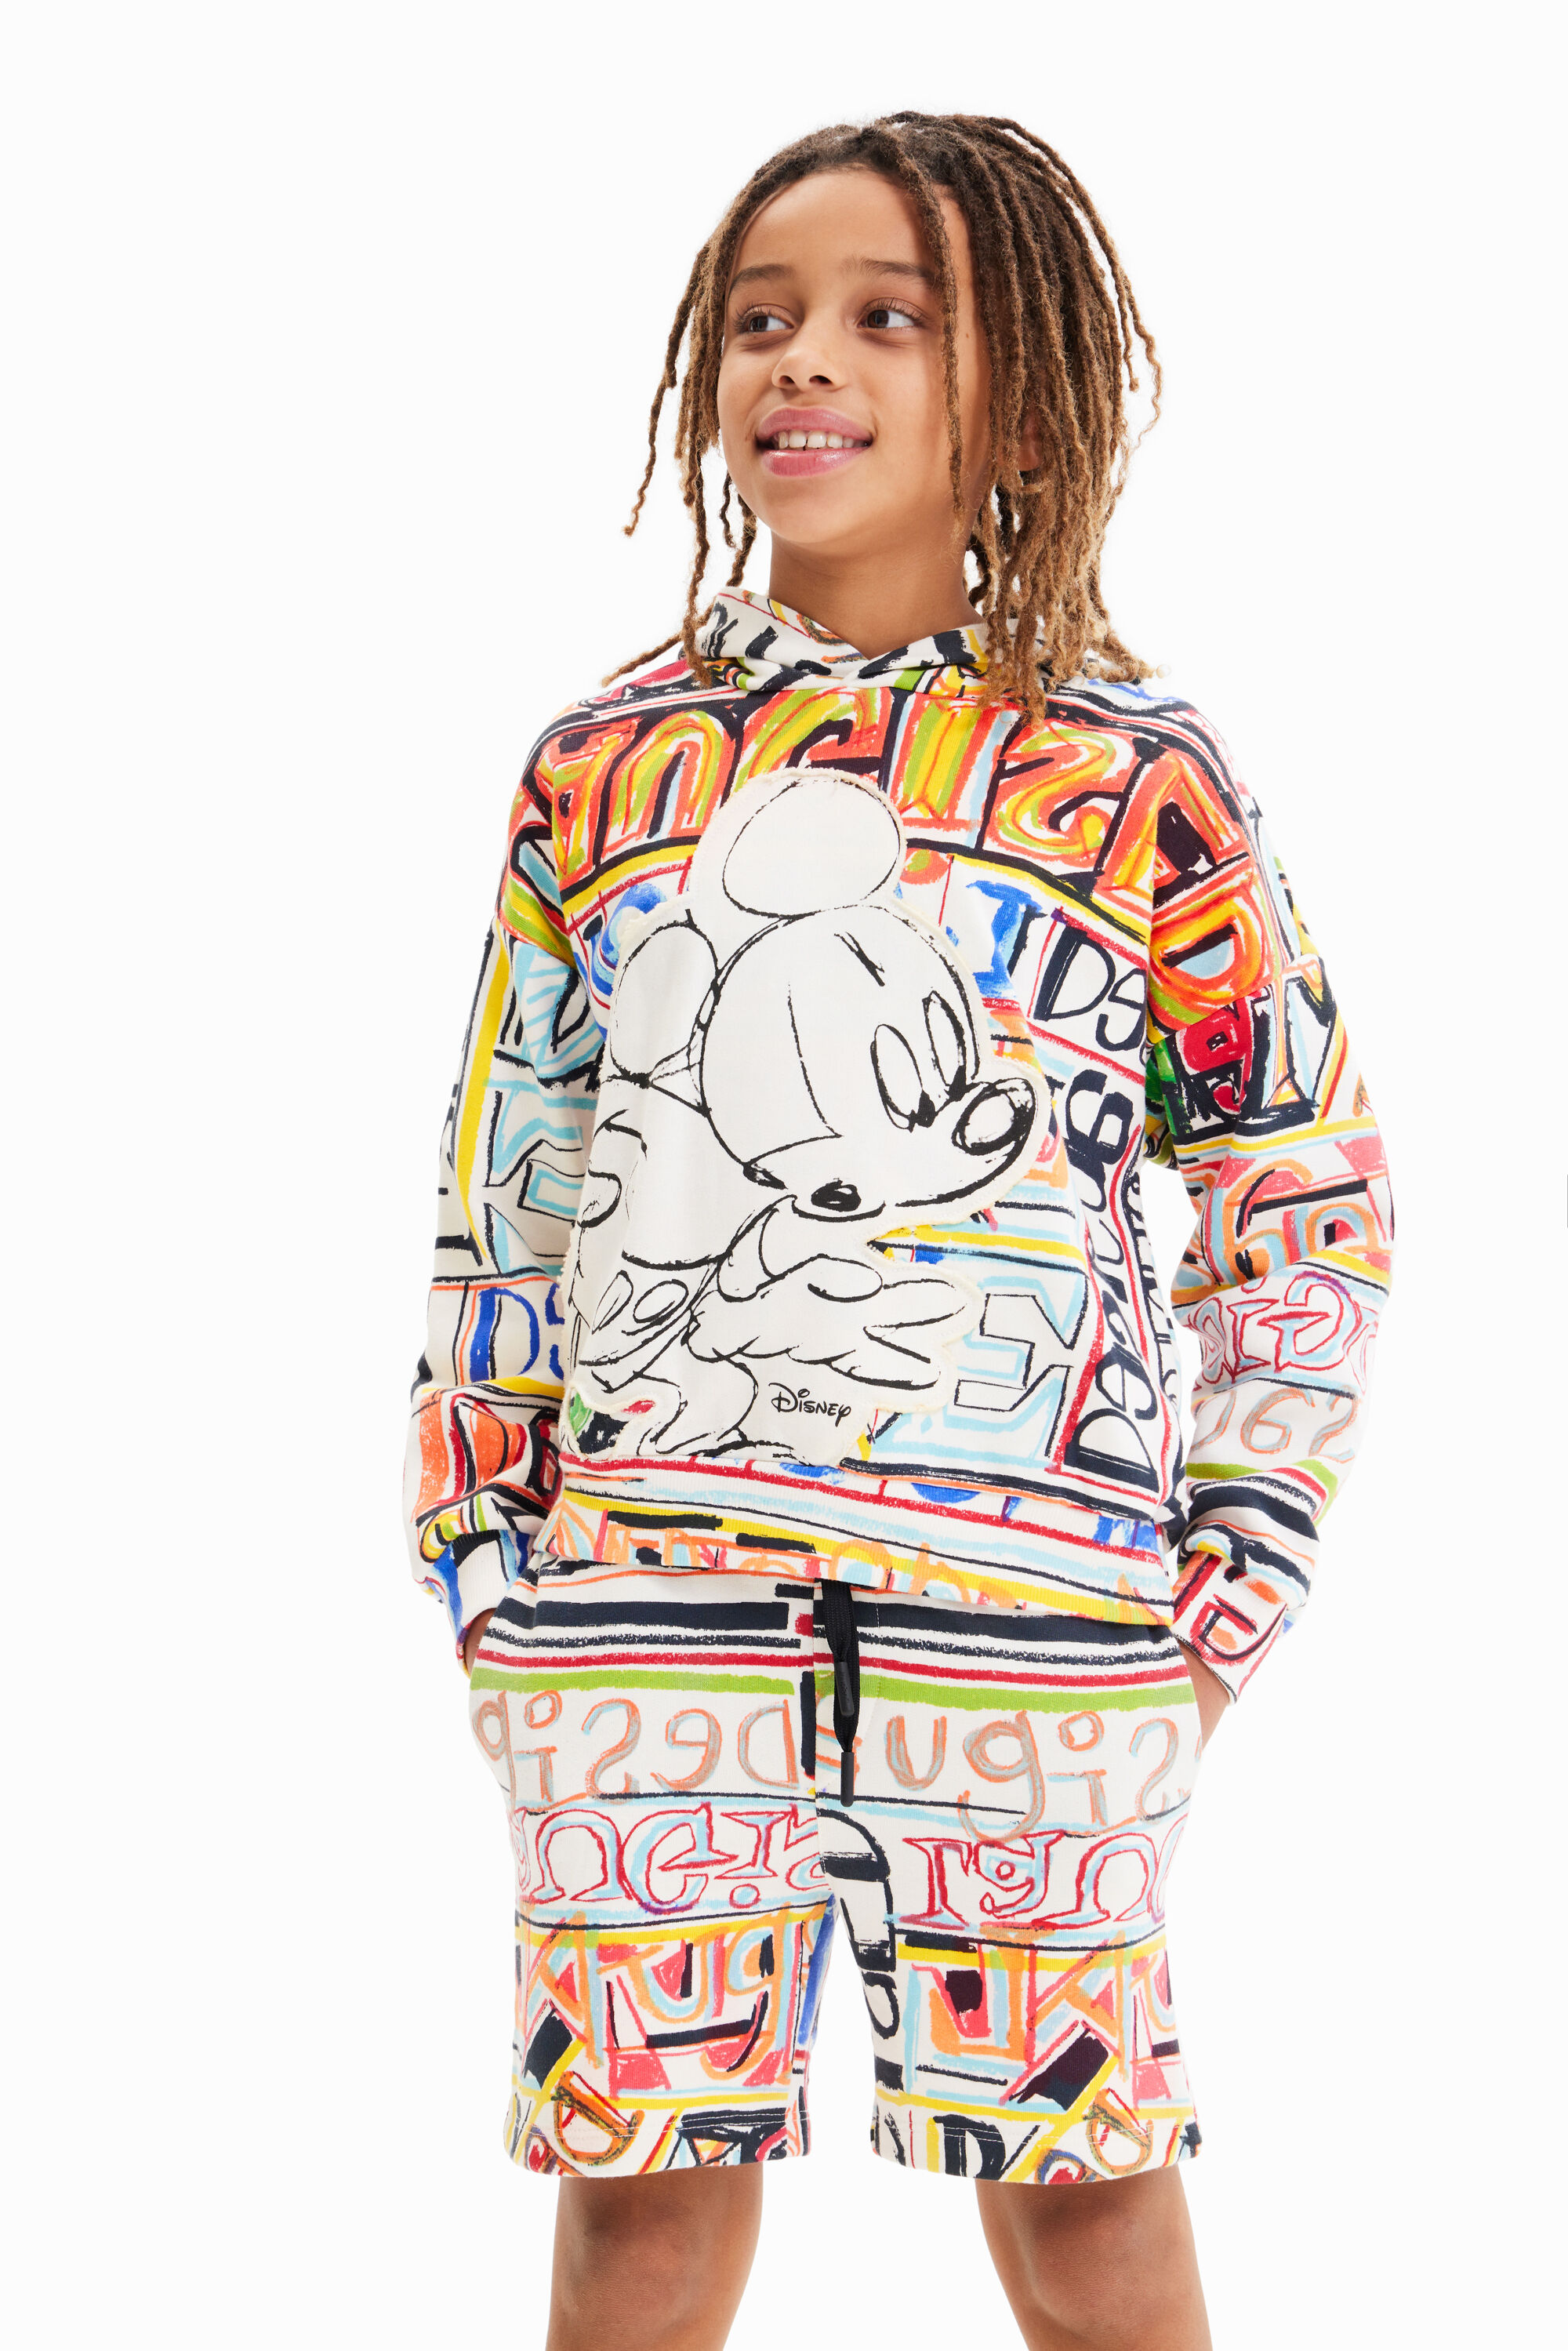 Disney’s Mickey Mouse oversize sweatshirt - MATERIAL FINISHES - S